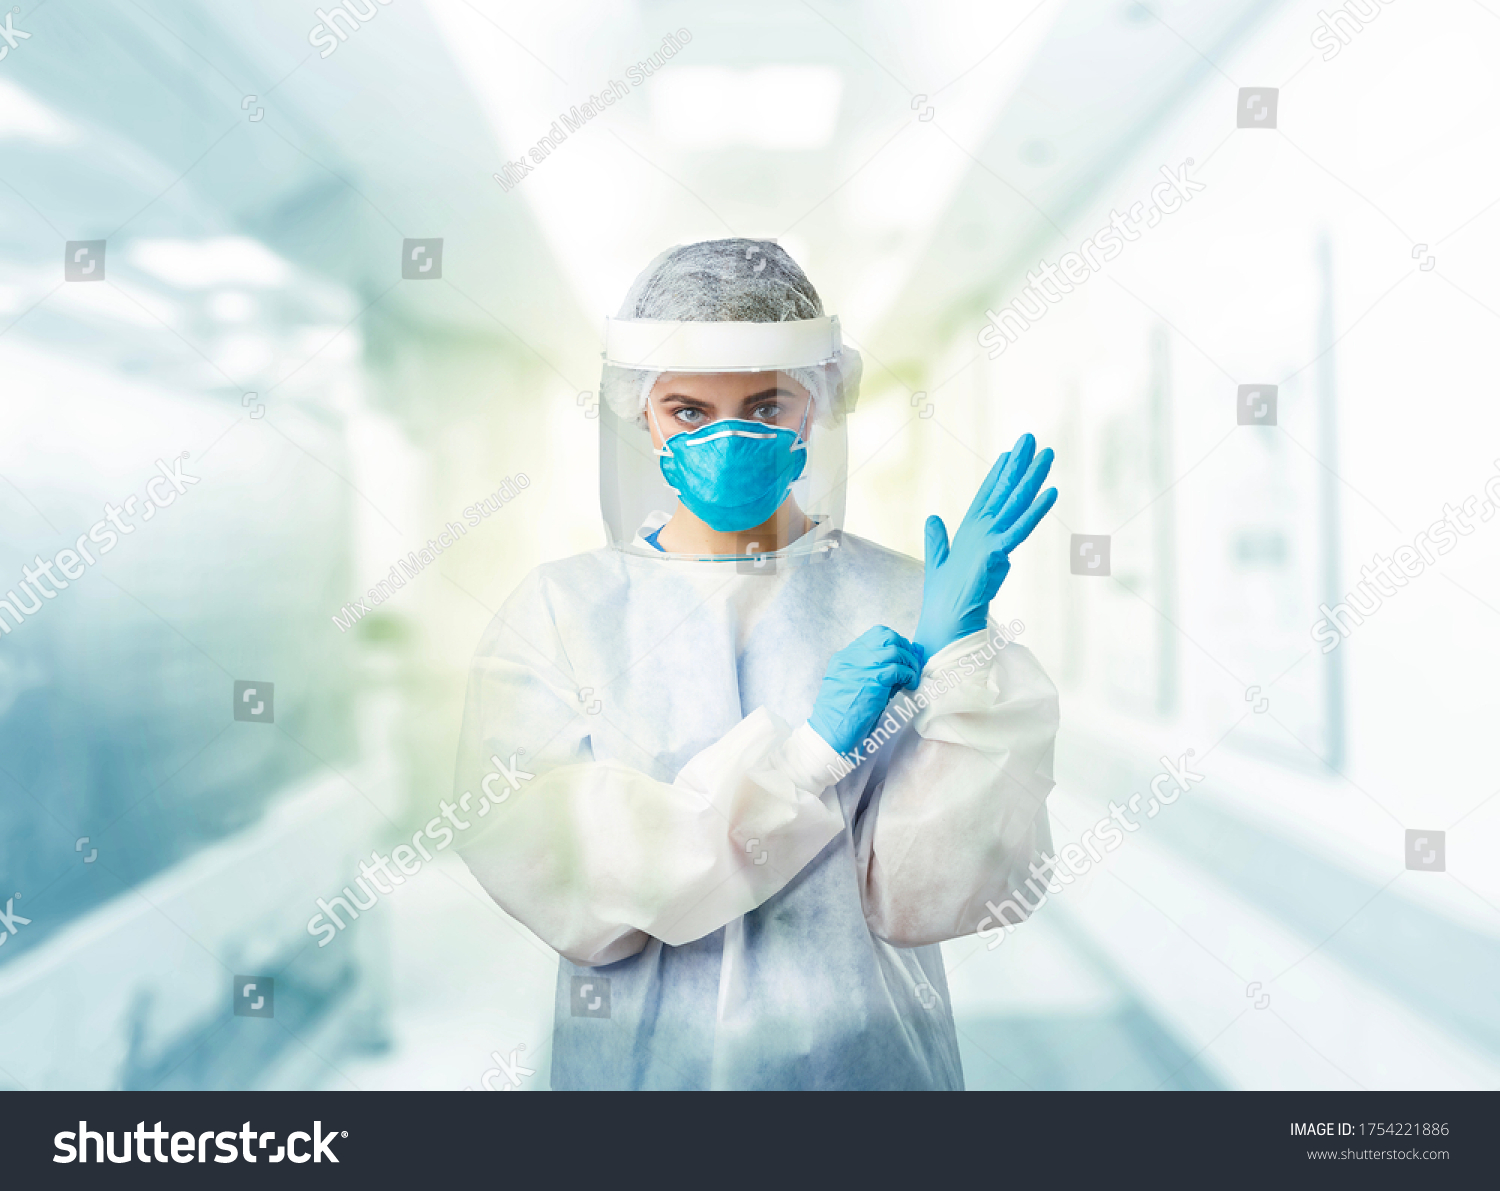 Doctors in the protective suits and masks are ready for examining the infected aging in the control area of hospital. #1754221886